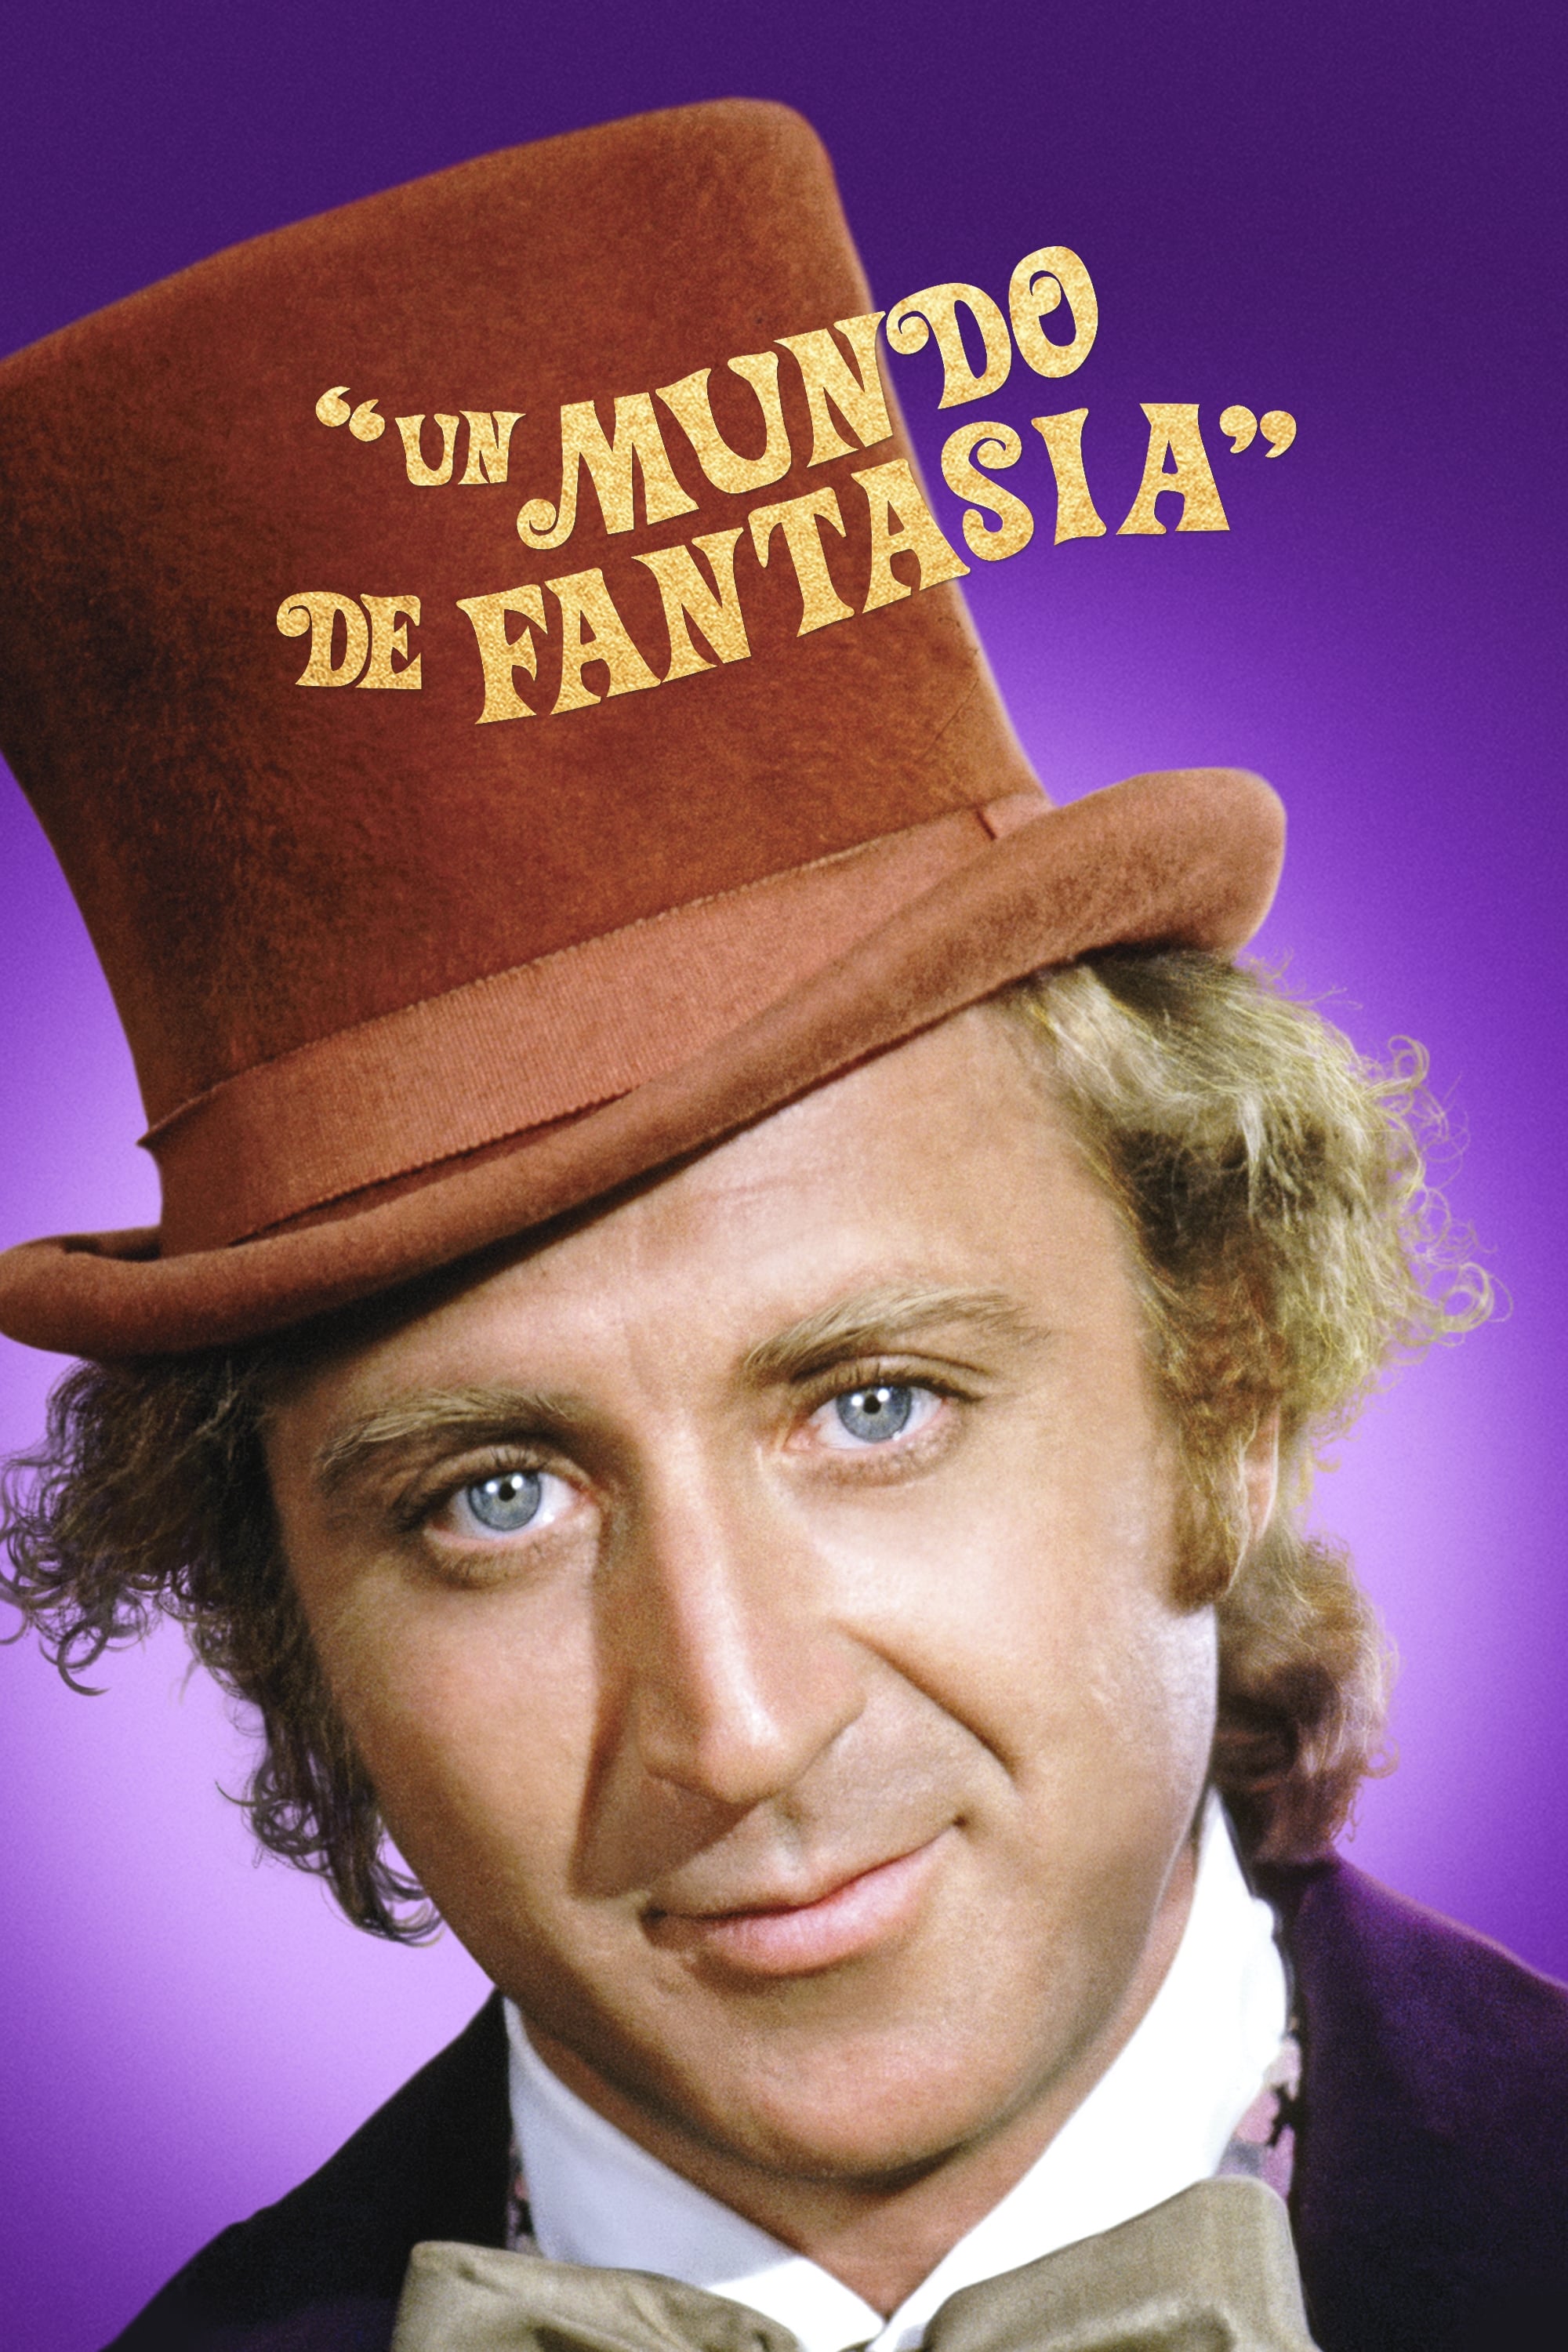 Willy wonka and the chocolate factory album cover nmfalas